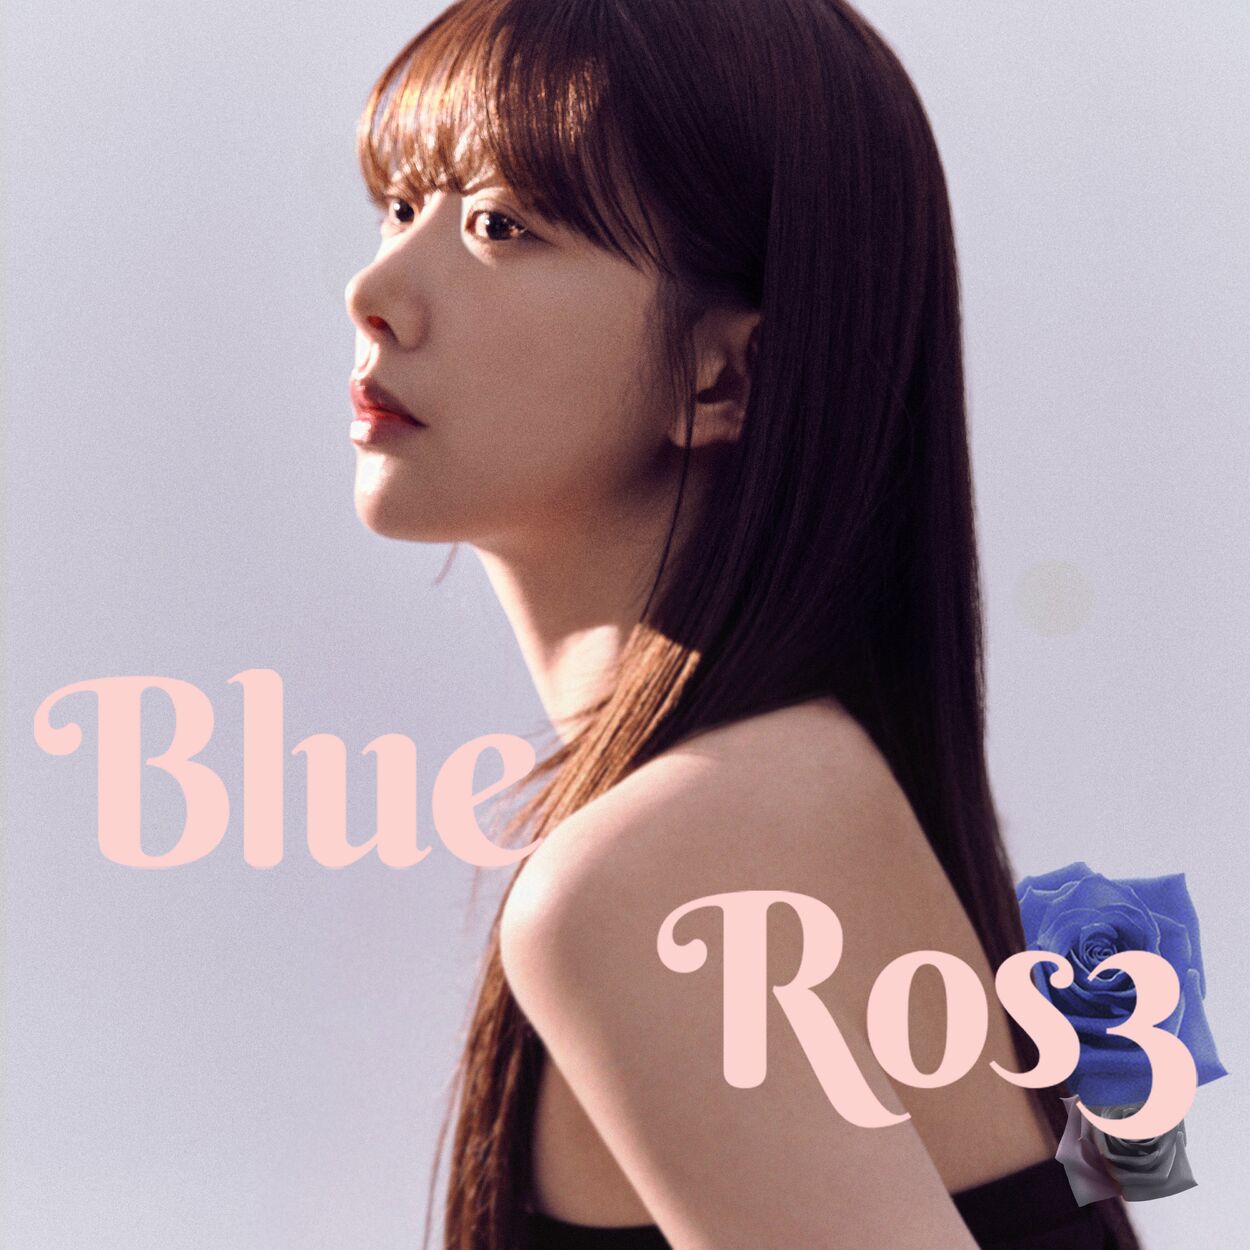 Eunice – BLUE ROS3 (miracle) – Single